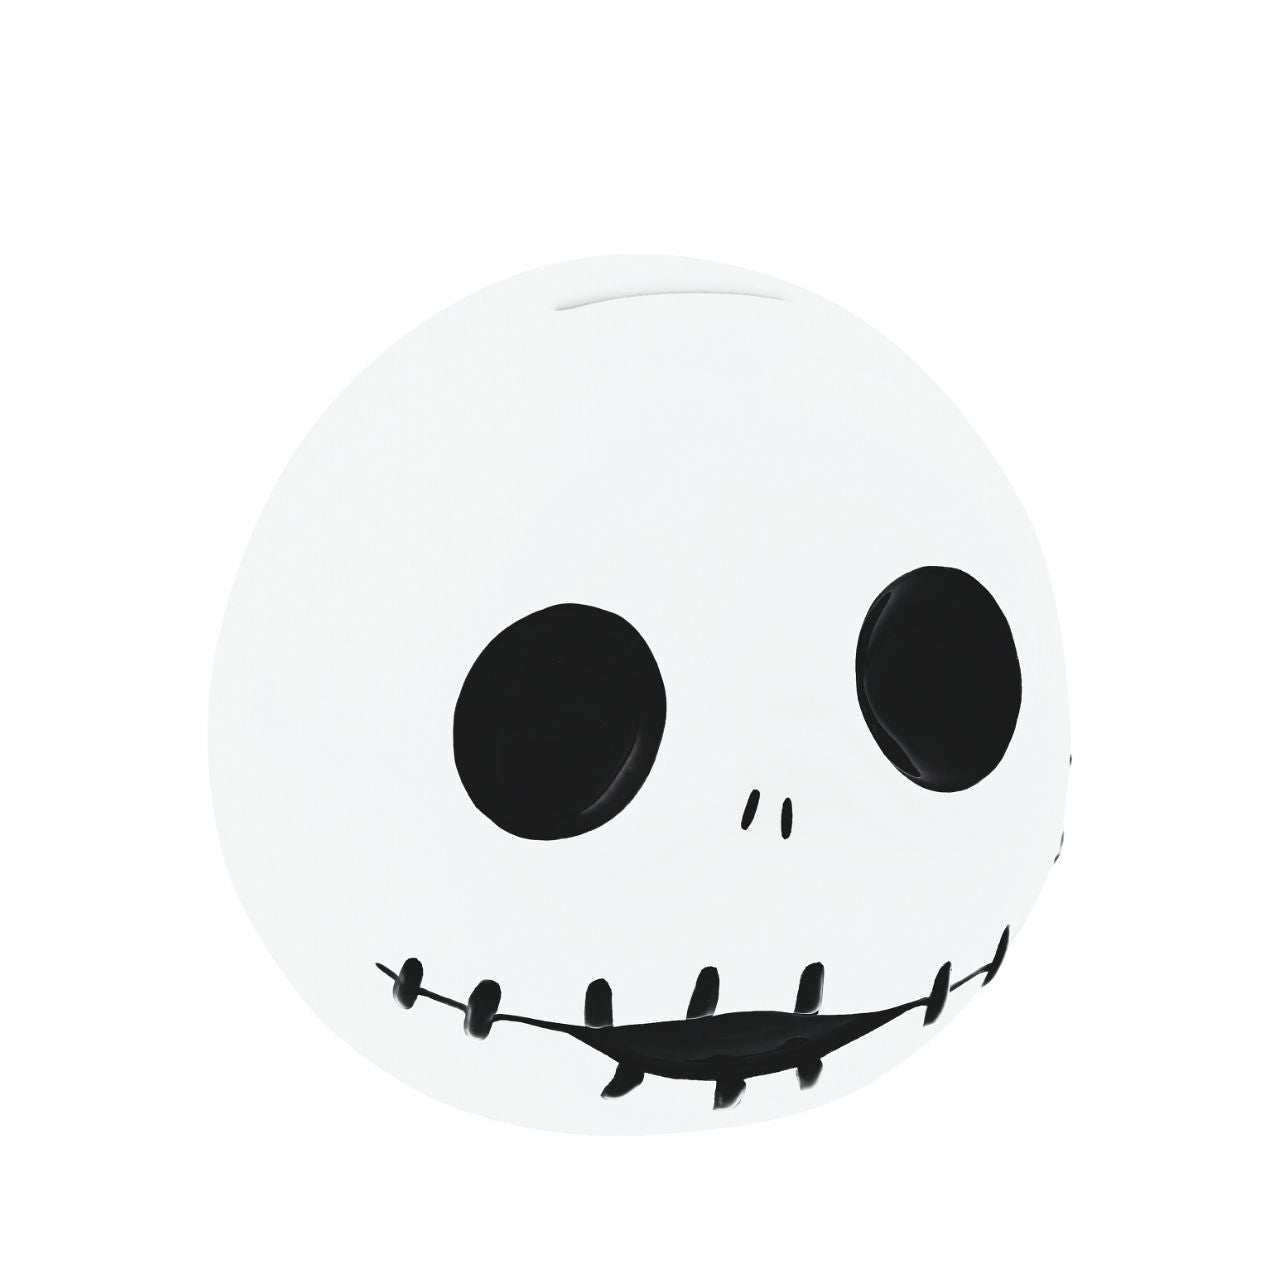 Disney Master of Fright Jack Skellington Money Bank  The Master of Fright is here with his cross-stitch mouth and big eyes. The Jack Skellington Money Bank is perfect for any Nightmare Before Christmas fan.